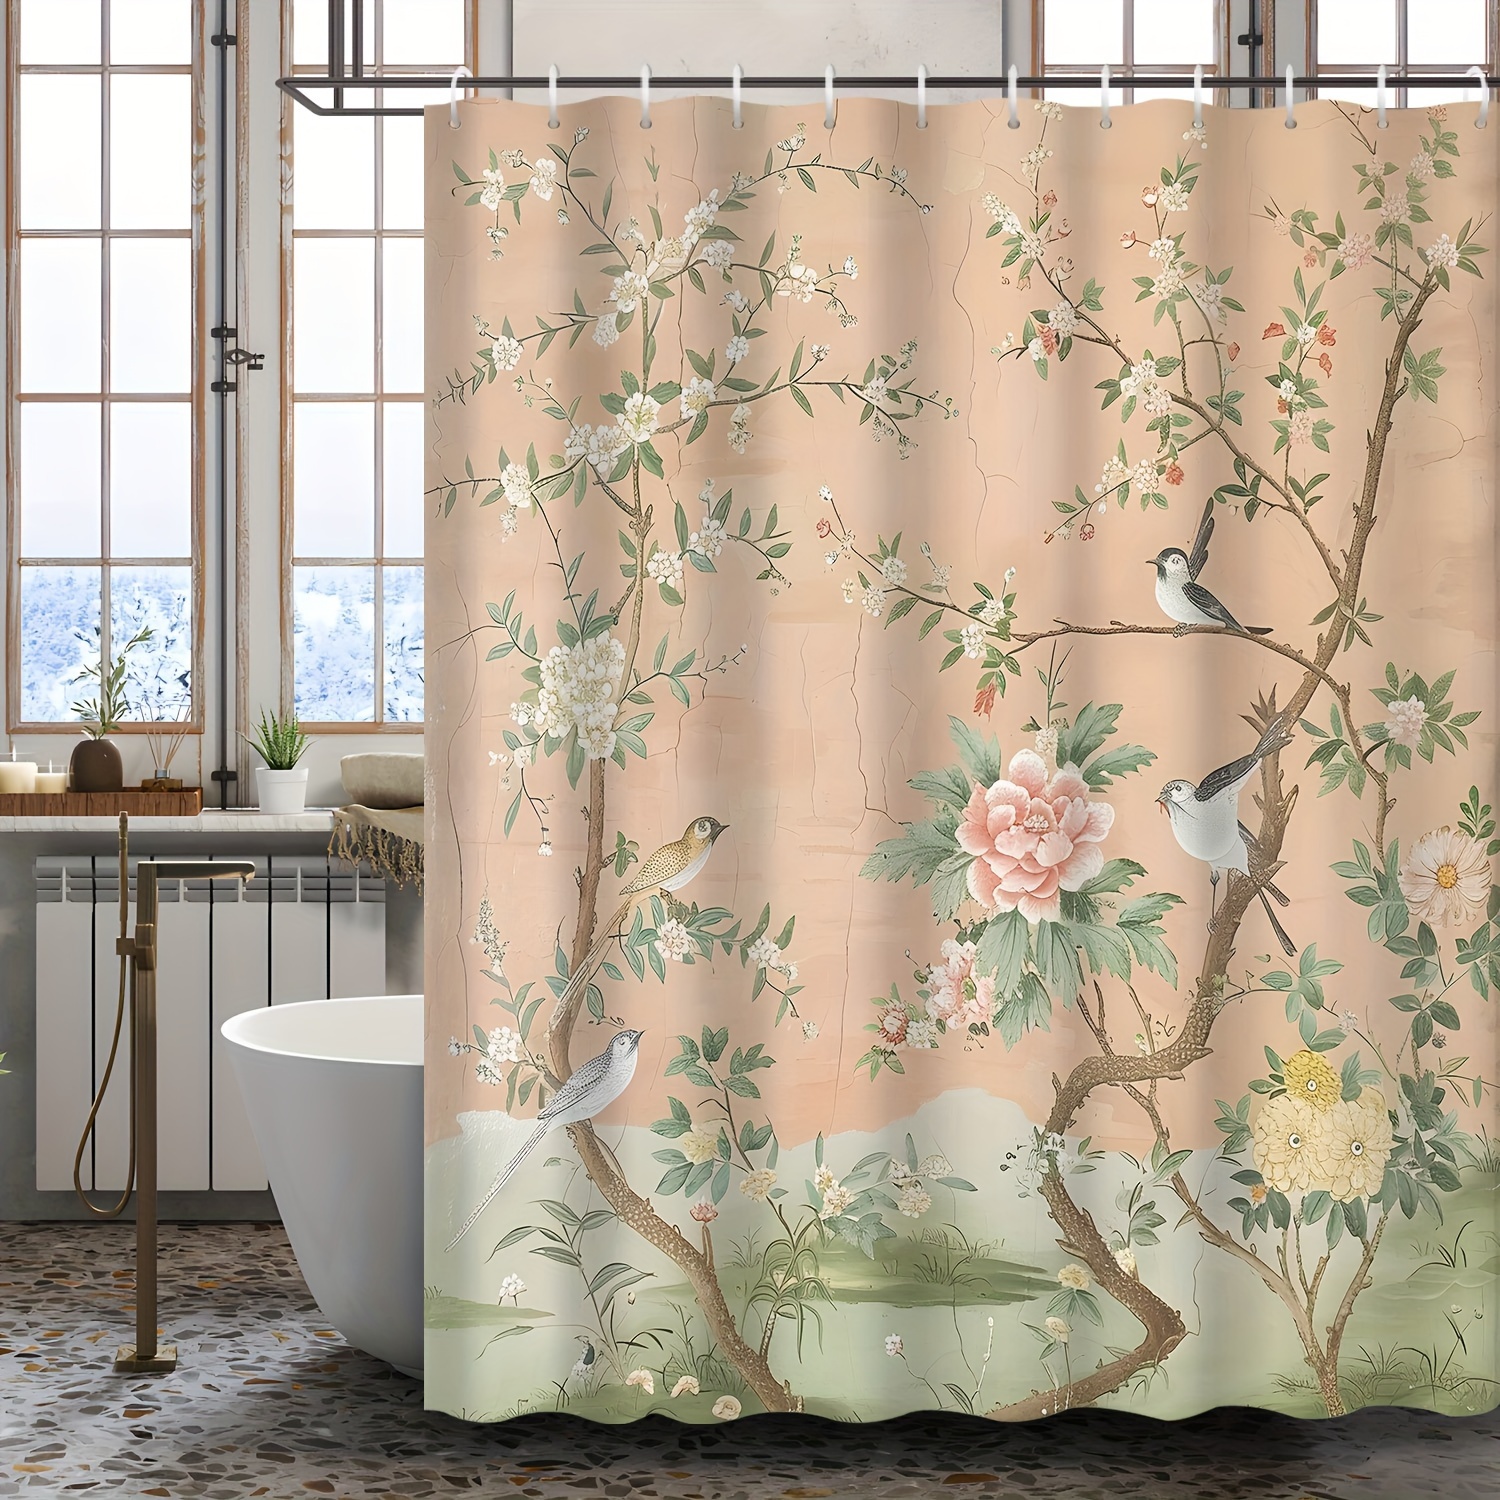 

Zen Garden Birds And Floral Shower Curtain Set, Chinese Style Magpie And Print, Water-resistant Polyester Fabric Bathroom Decor With 12 Hooks, Grommet Top Woven Hanging Tapestry, 72x72 Inches